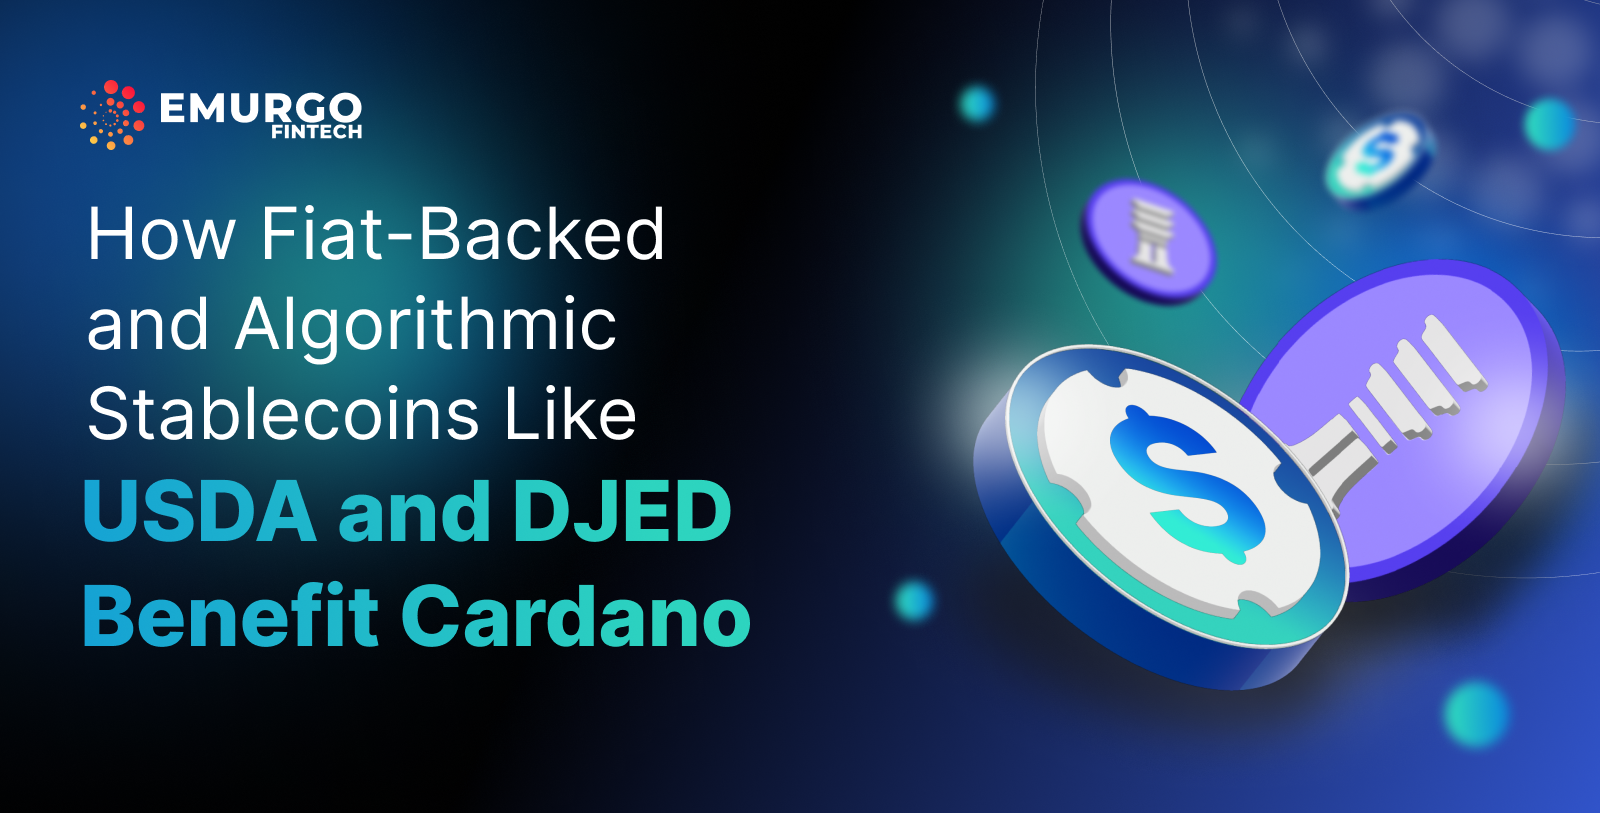 How-Fiat-Backed-and-Algorithmic-Stablecoins-Like-USDA-and-DJED-Benefit-Cardano2023.png